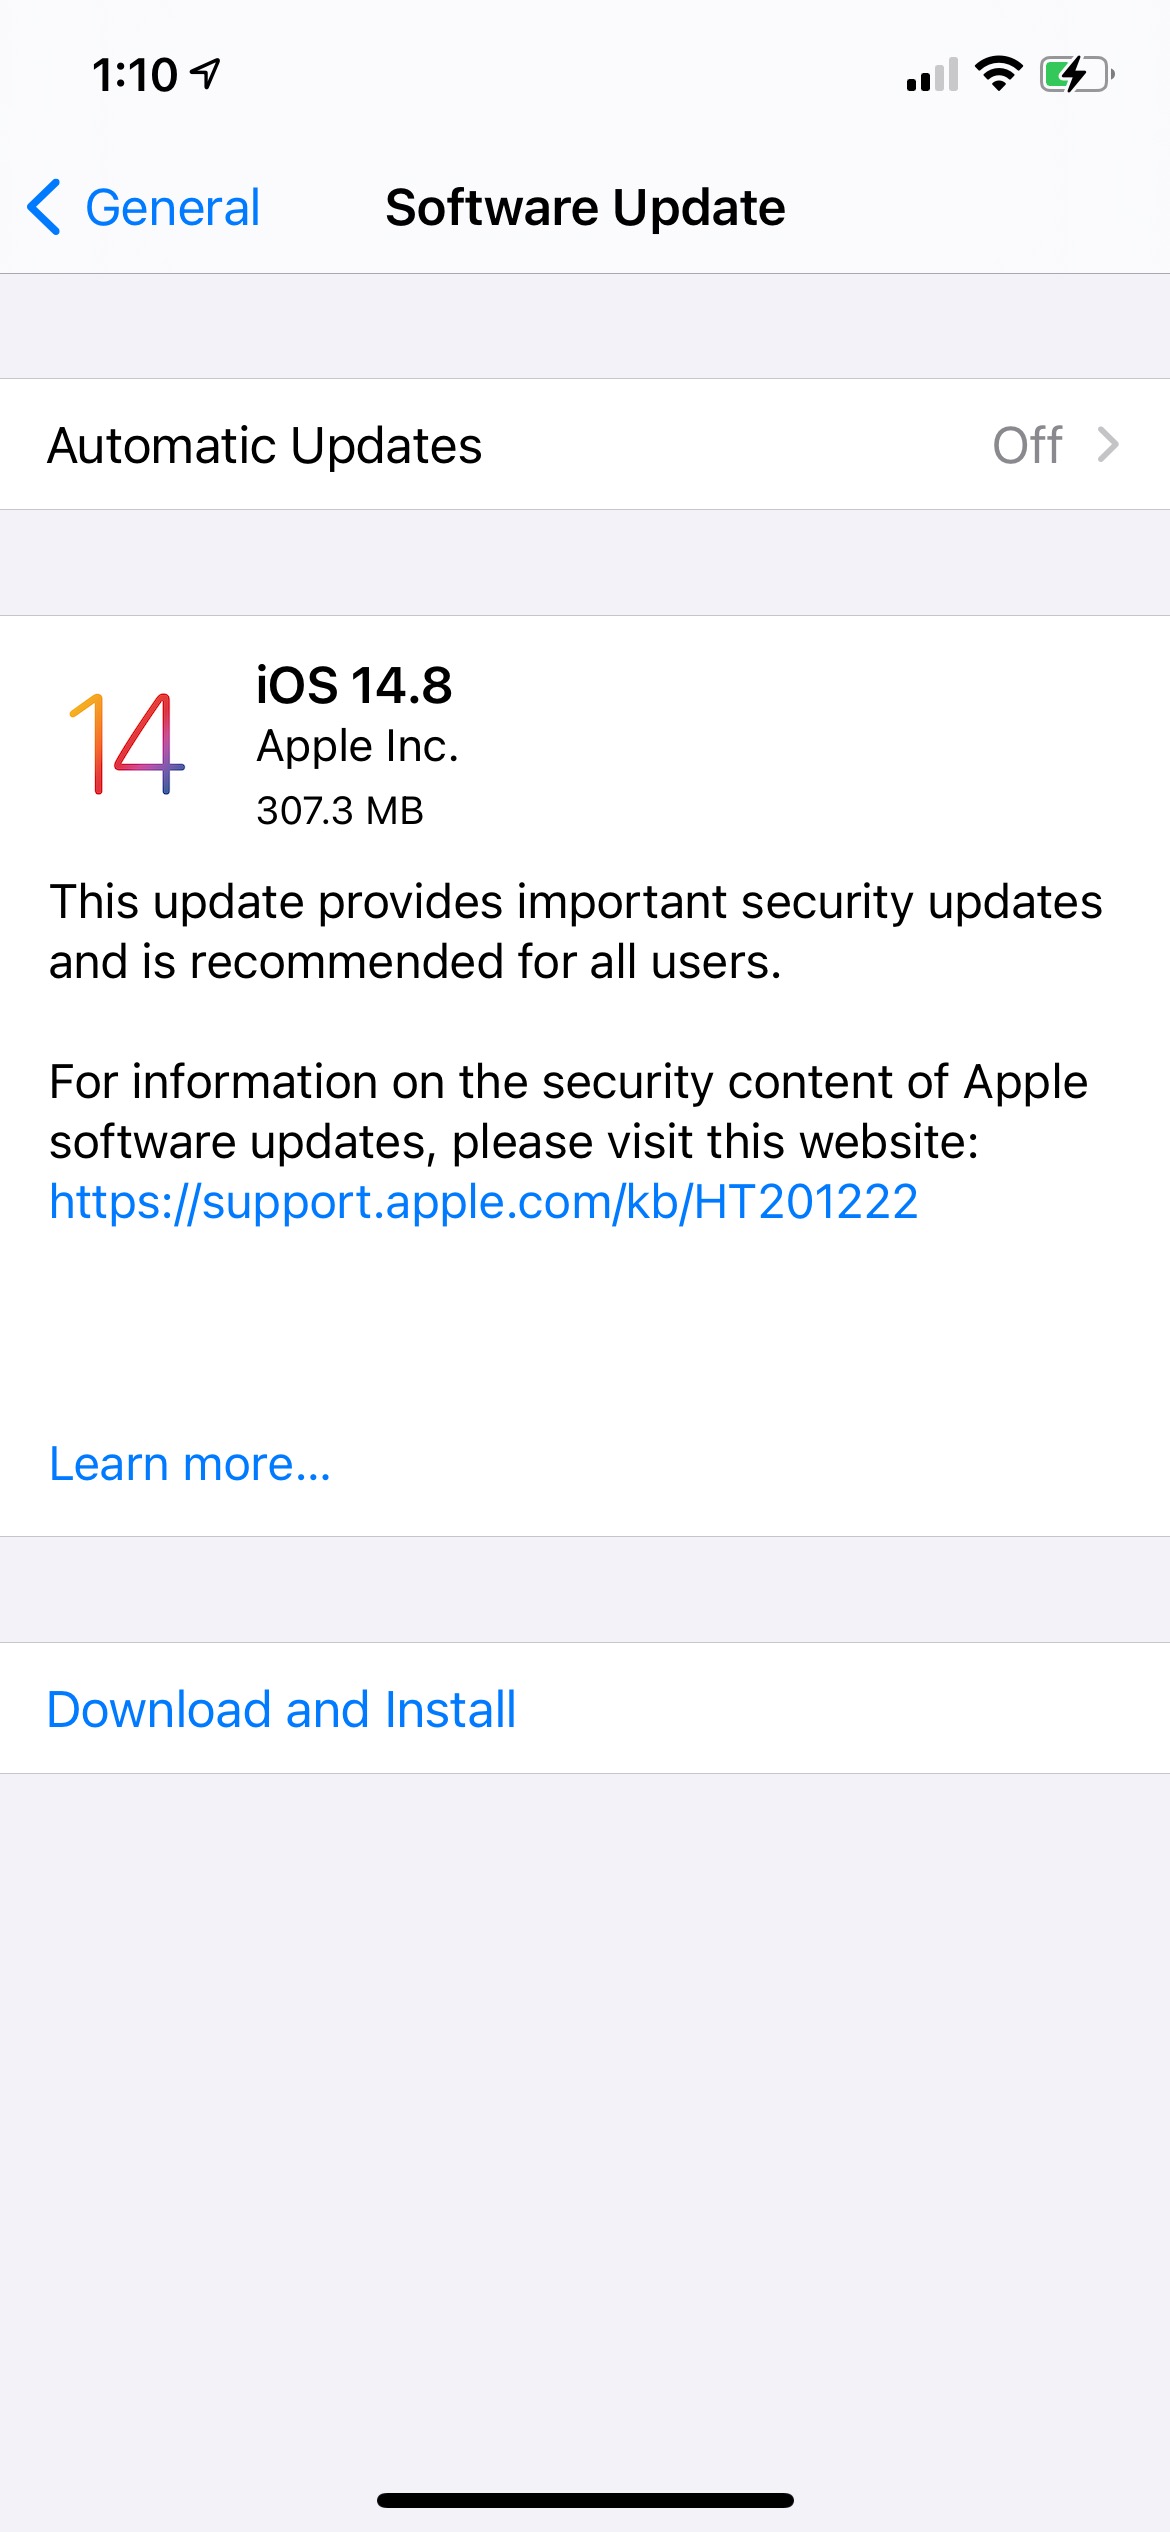 Apple Releases iOS 14.8 and iPadOS 14.8 [Download]